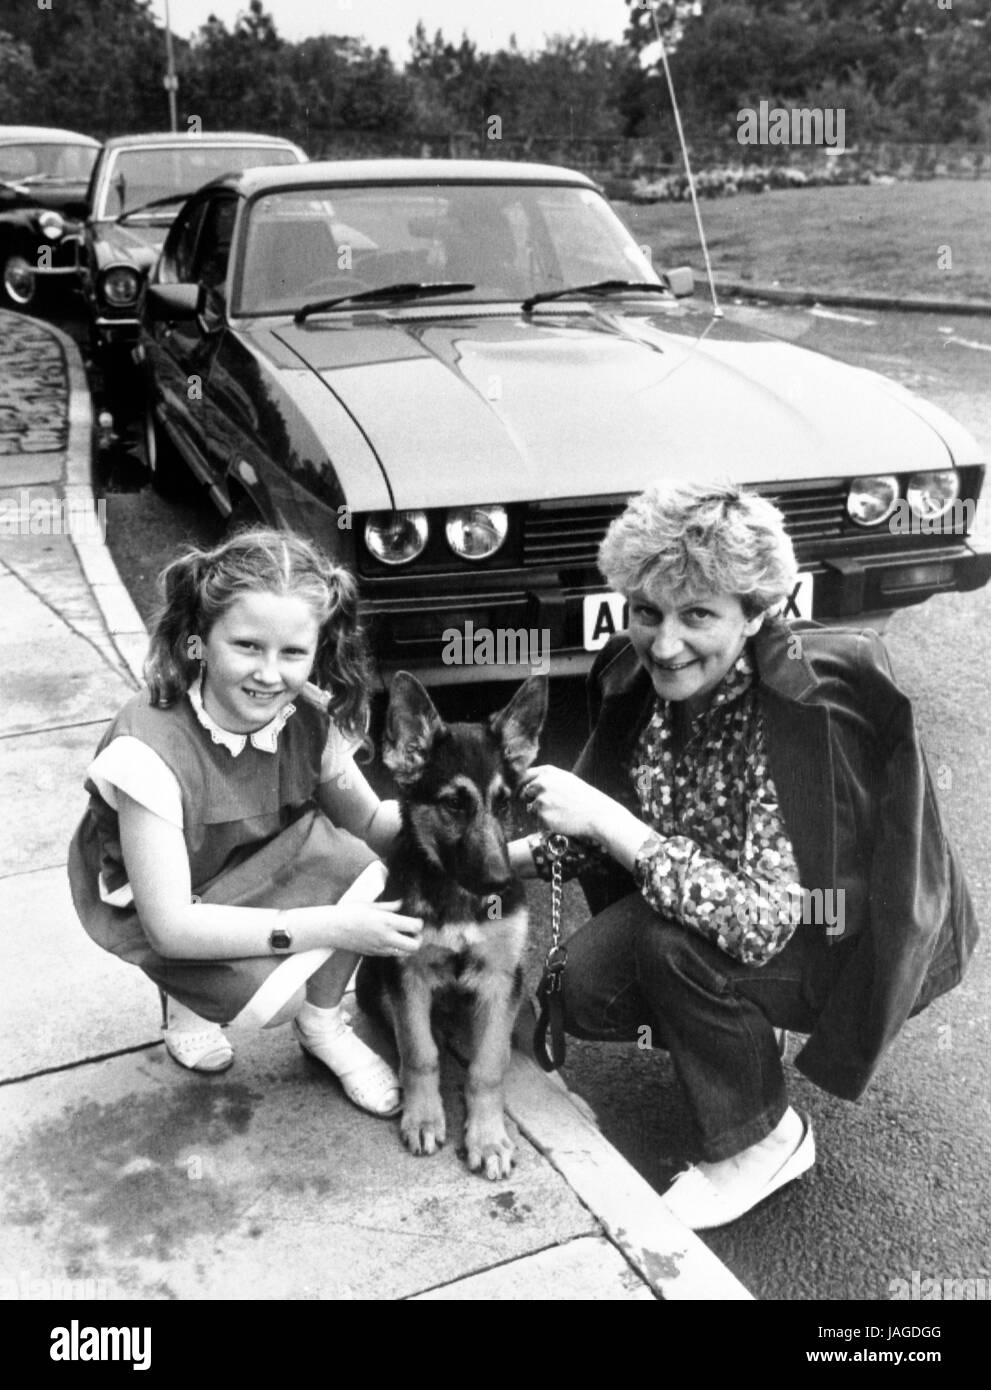 Elizabeth Parrie, 9, and her German Shepherd pup, Rocky, in Liverpool with Elizabeth's mother Rosemary. Earlier the girl and her pup were curled up on the back seat of a Ford Capri (in background) when car thieves drove off in the vehicle. When Rocky barked the startled thieves abandoned the car and fled. Stock Photo